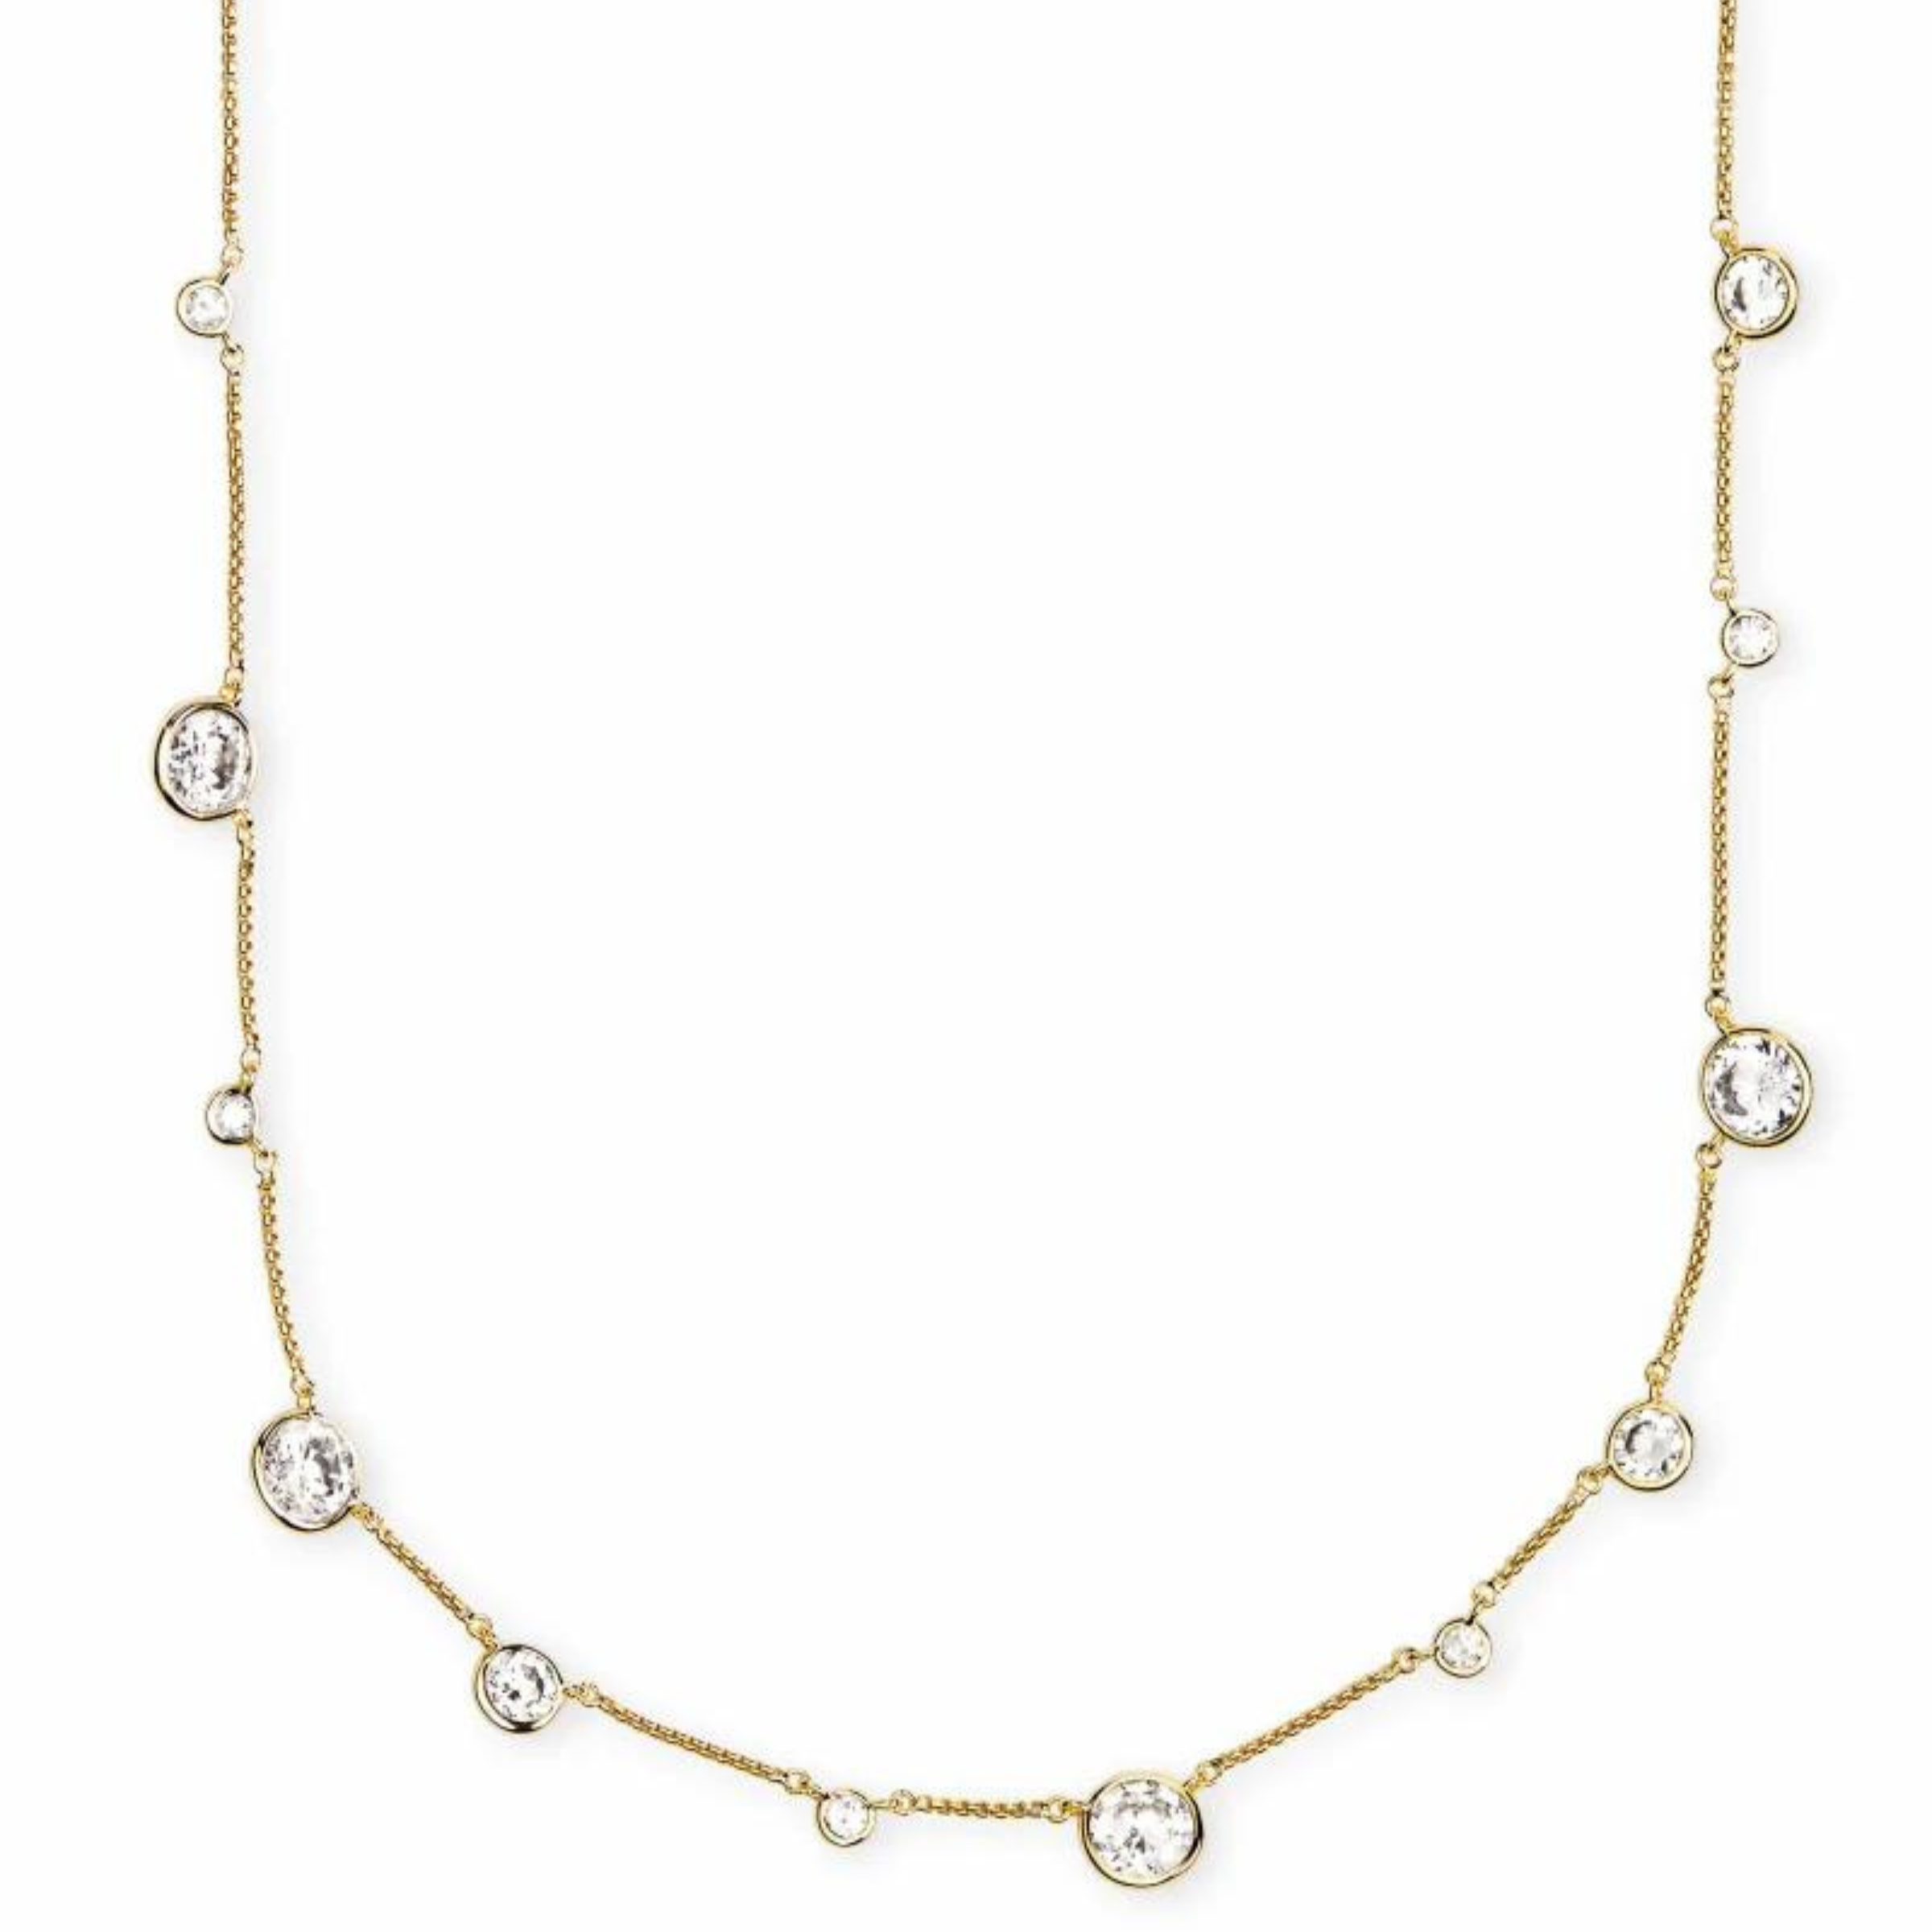 Gold necklace with different size clear crystals through out. This necklace is pictured on a white background. 